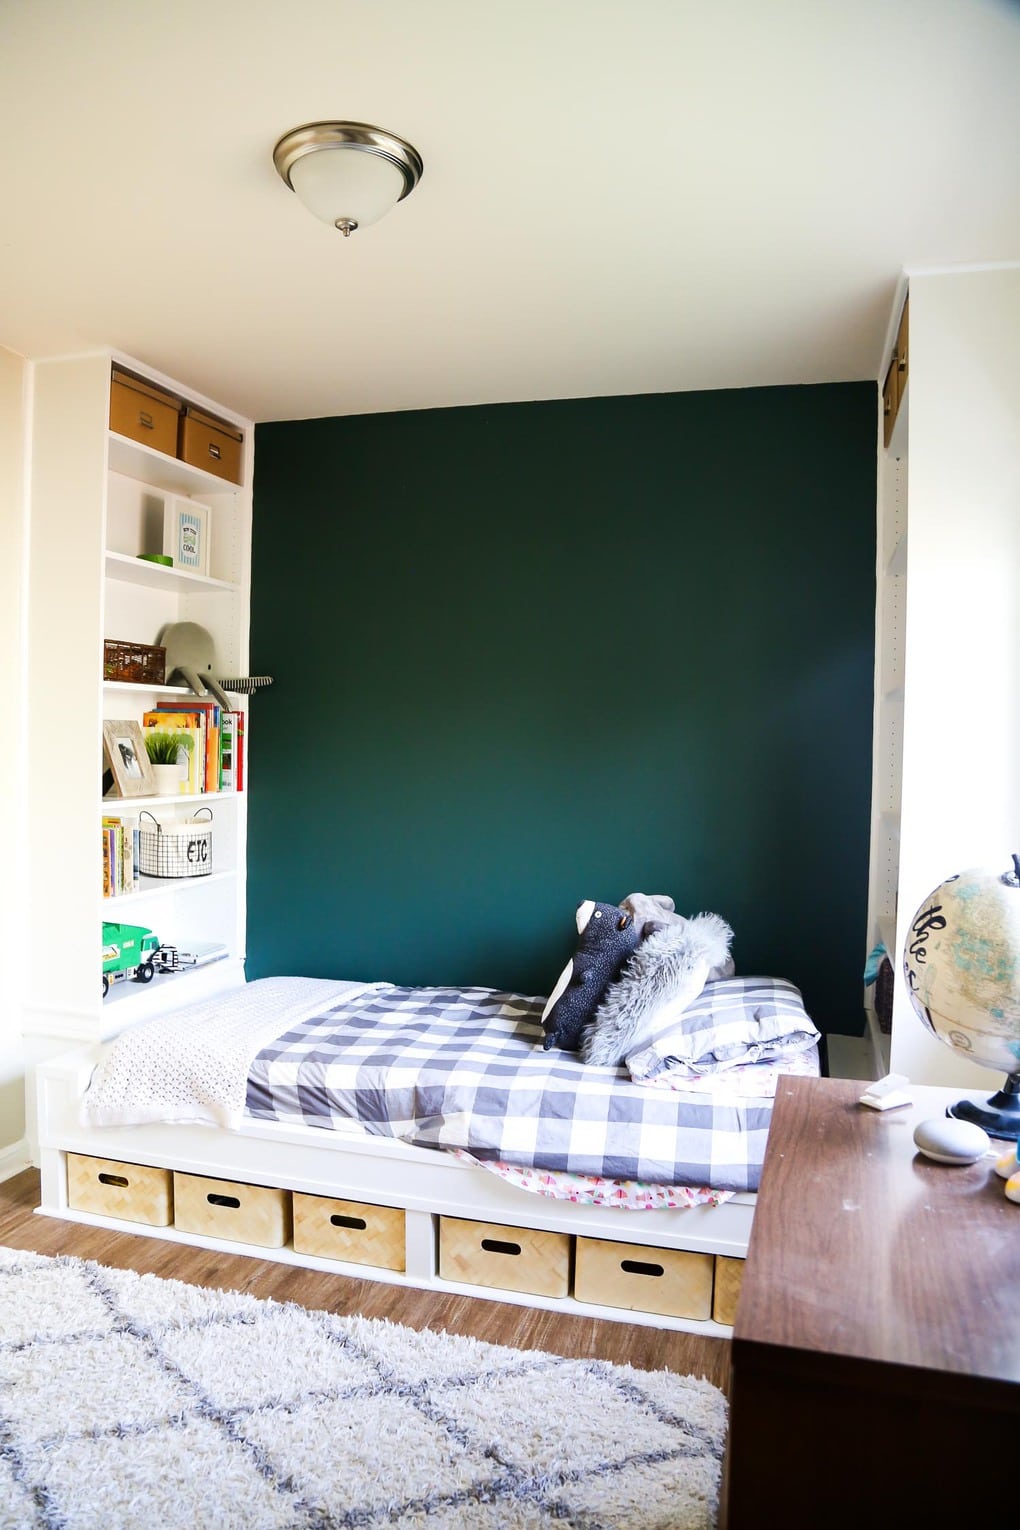 Build in shelves with a bed that has grey bedding and a green accent wall